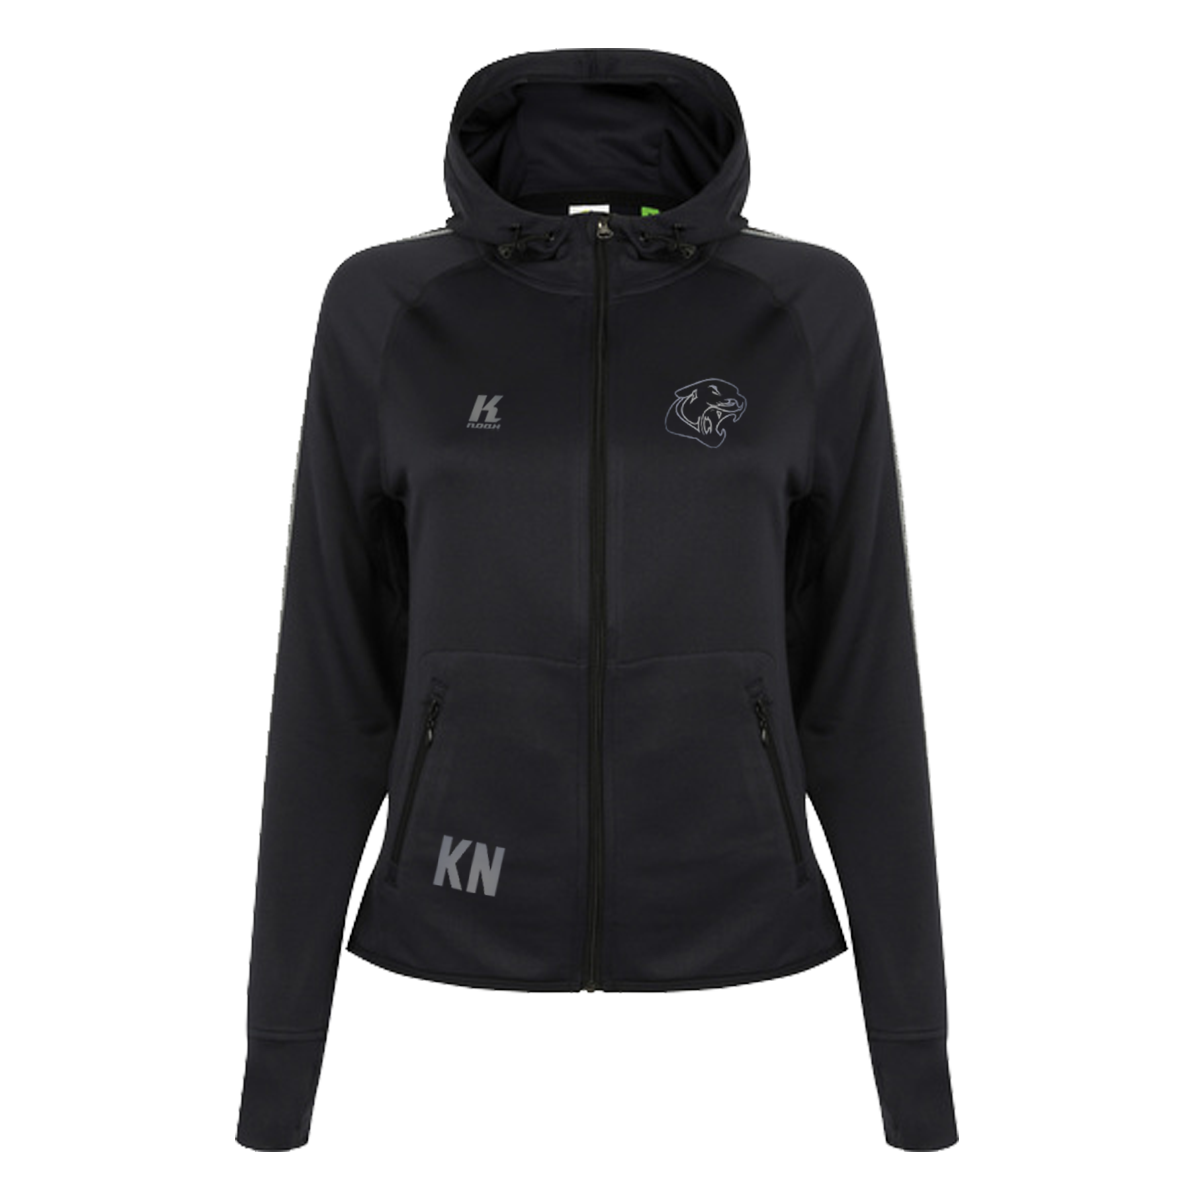 Cougars "Blackline" Womens Zip Hoodie TL551 with Initials/Playernumber